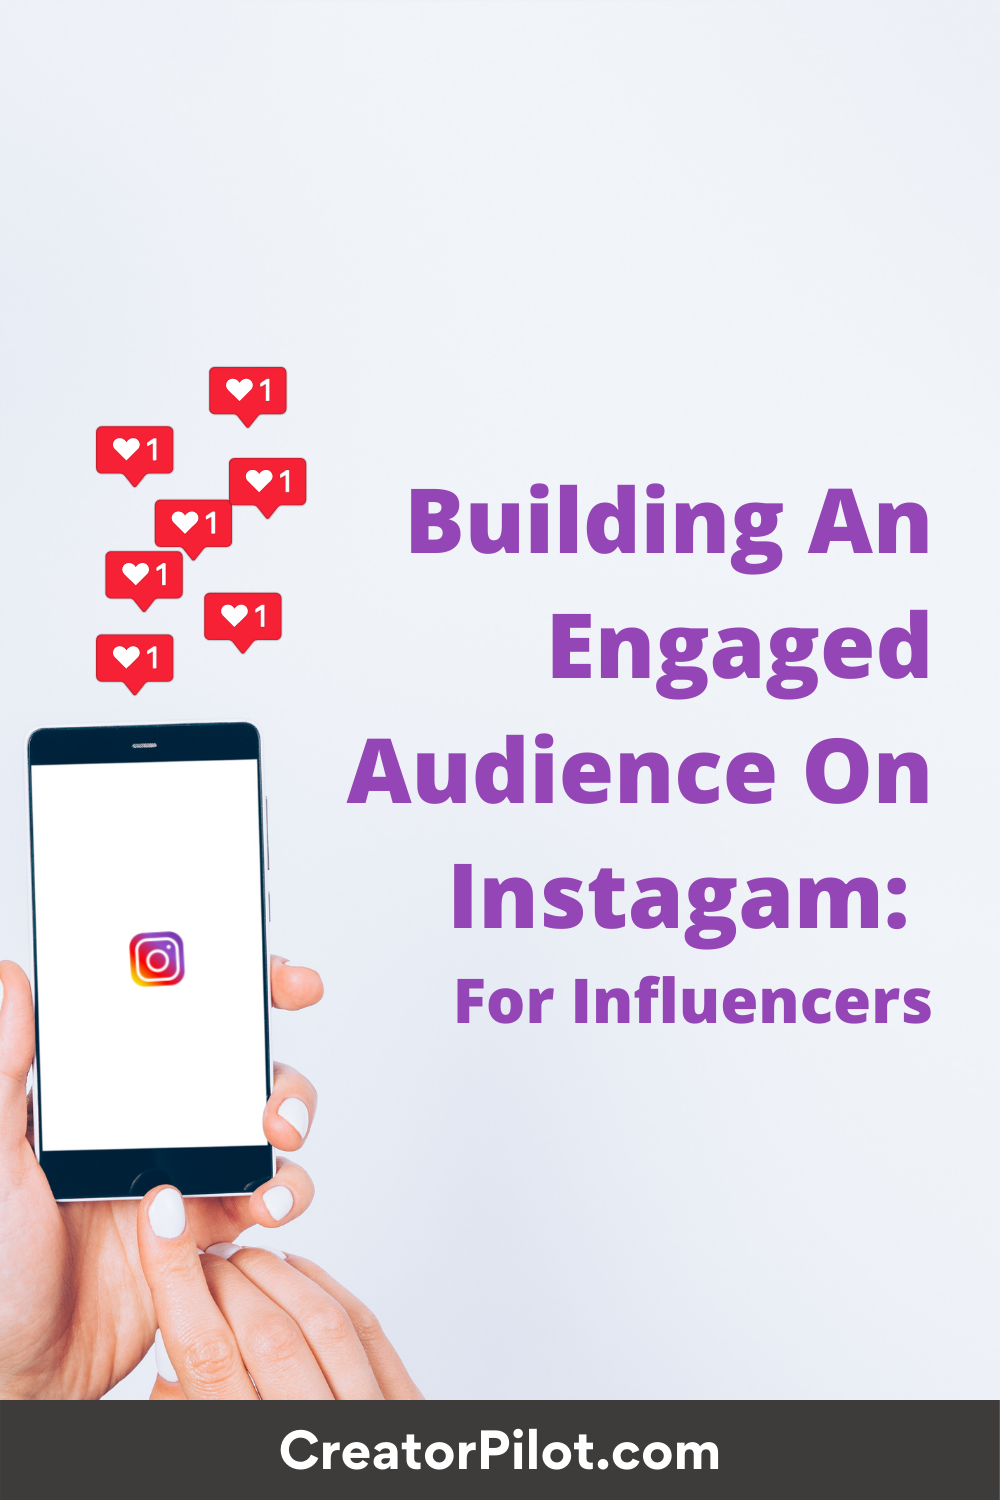 building an engaged audience on Instagram